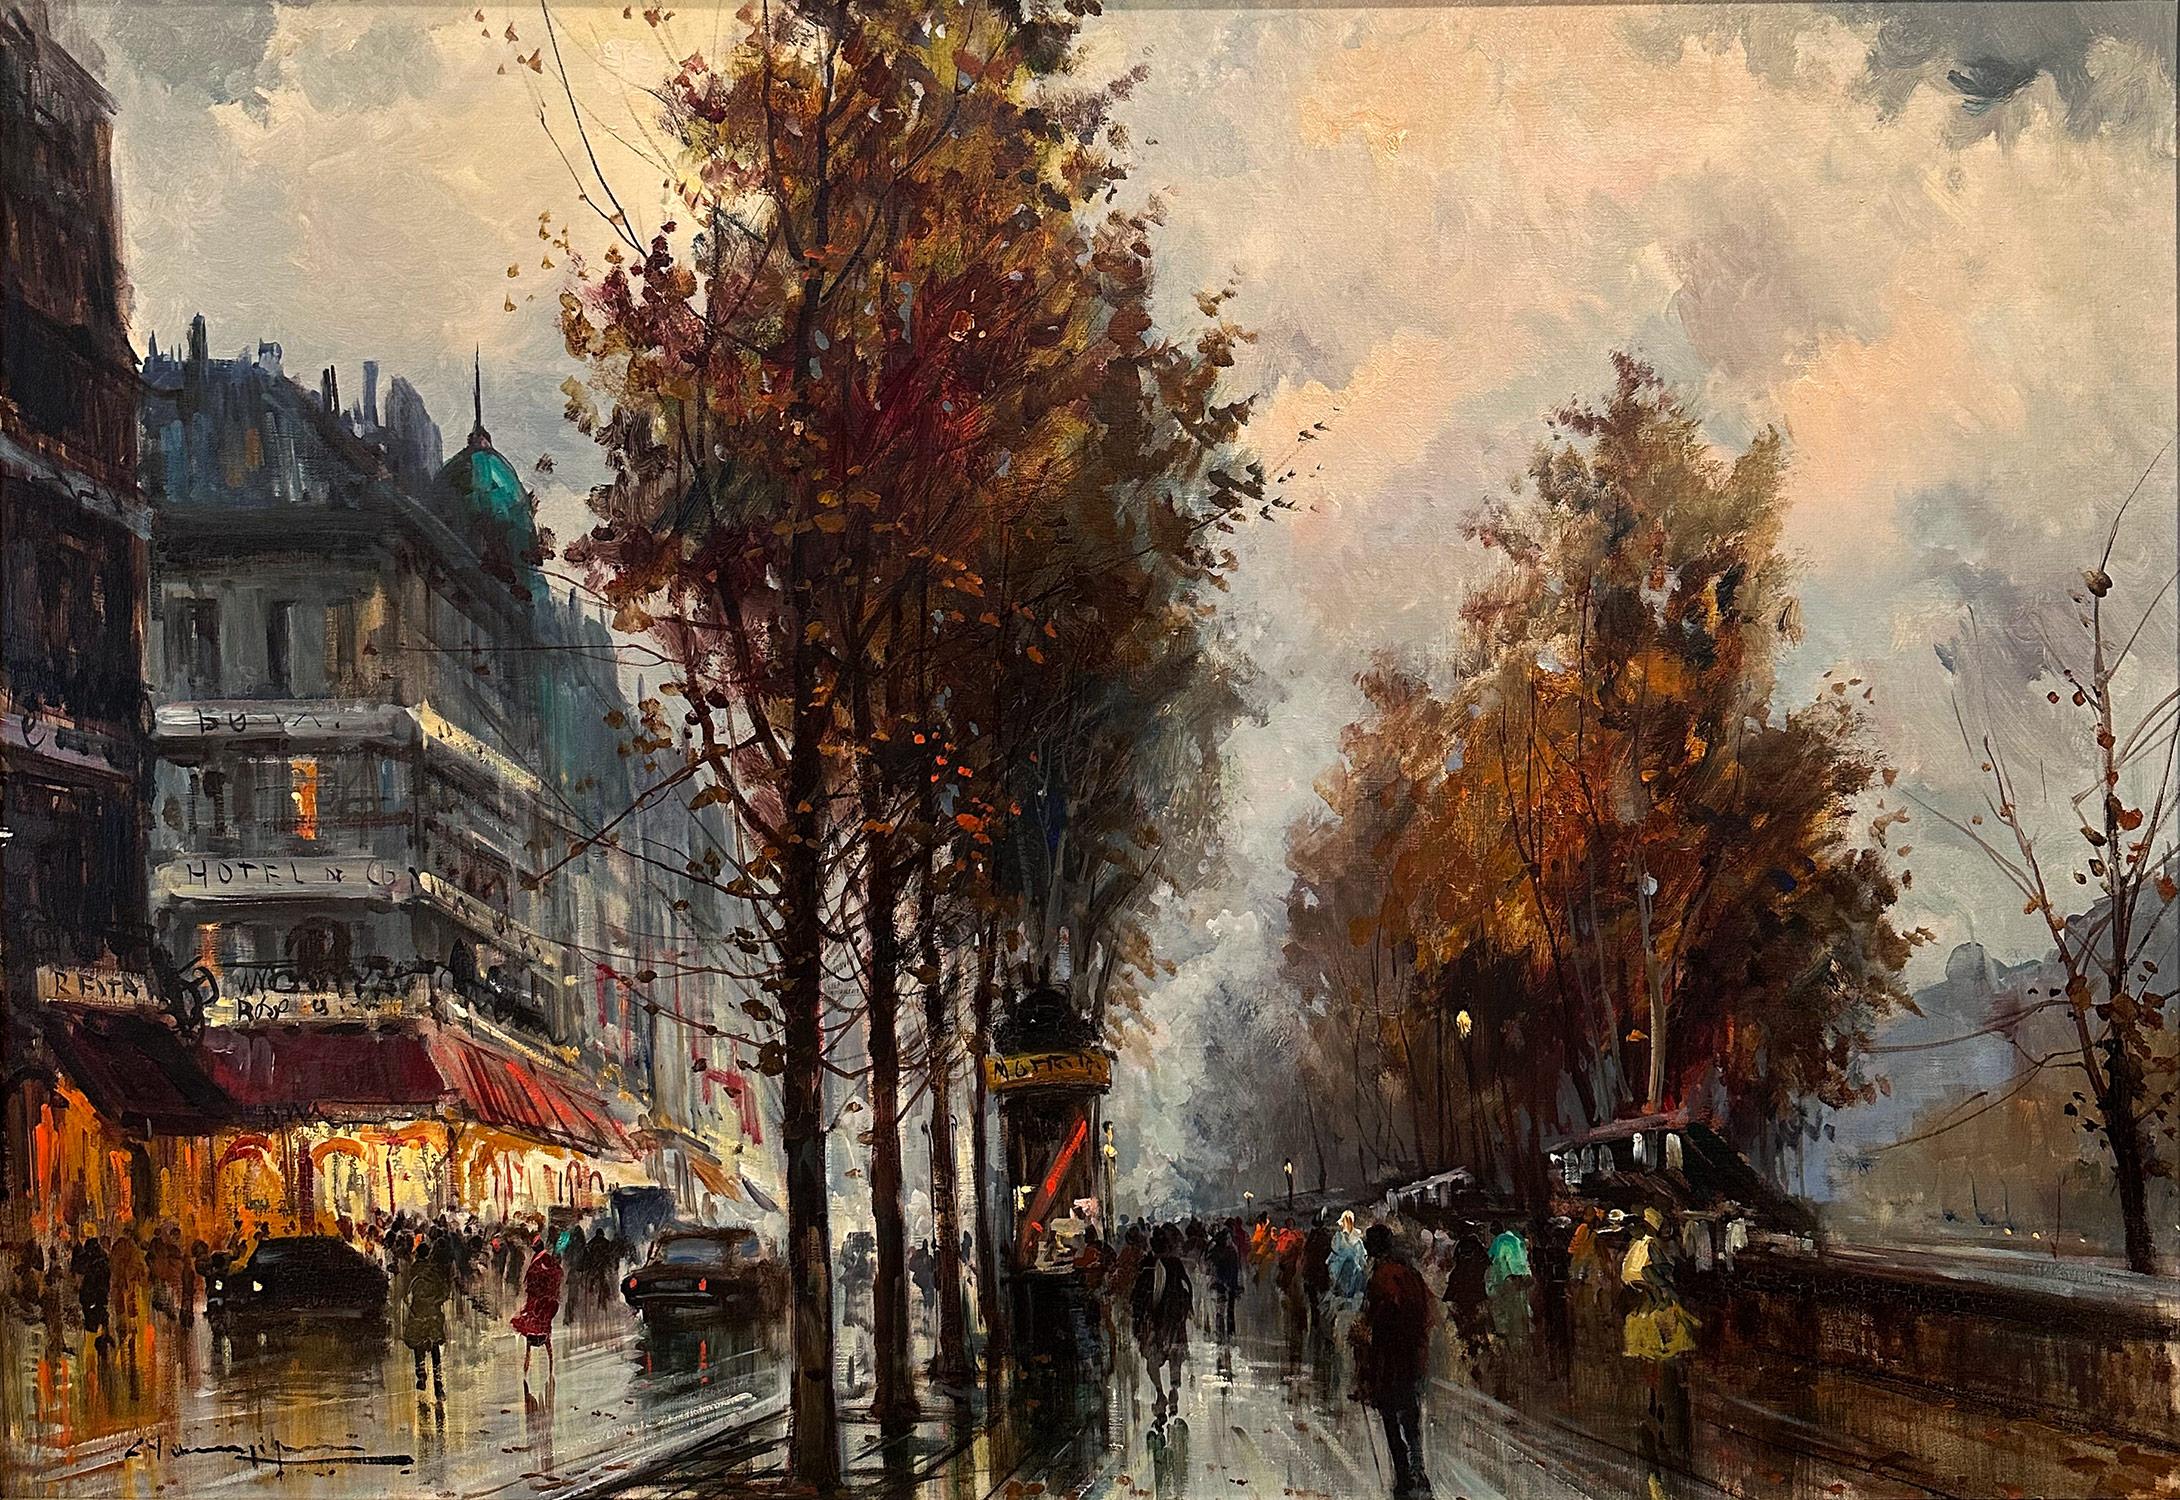 In this piece, the artist depicts his subject in an abstract and impressionistic way, capturing the busy Seine by the Hotel de Paris. The streets of Paris are portrayed in the distance with much life and vibration, we can feel the energy